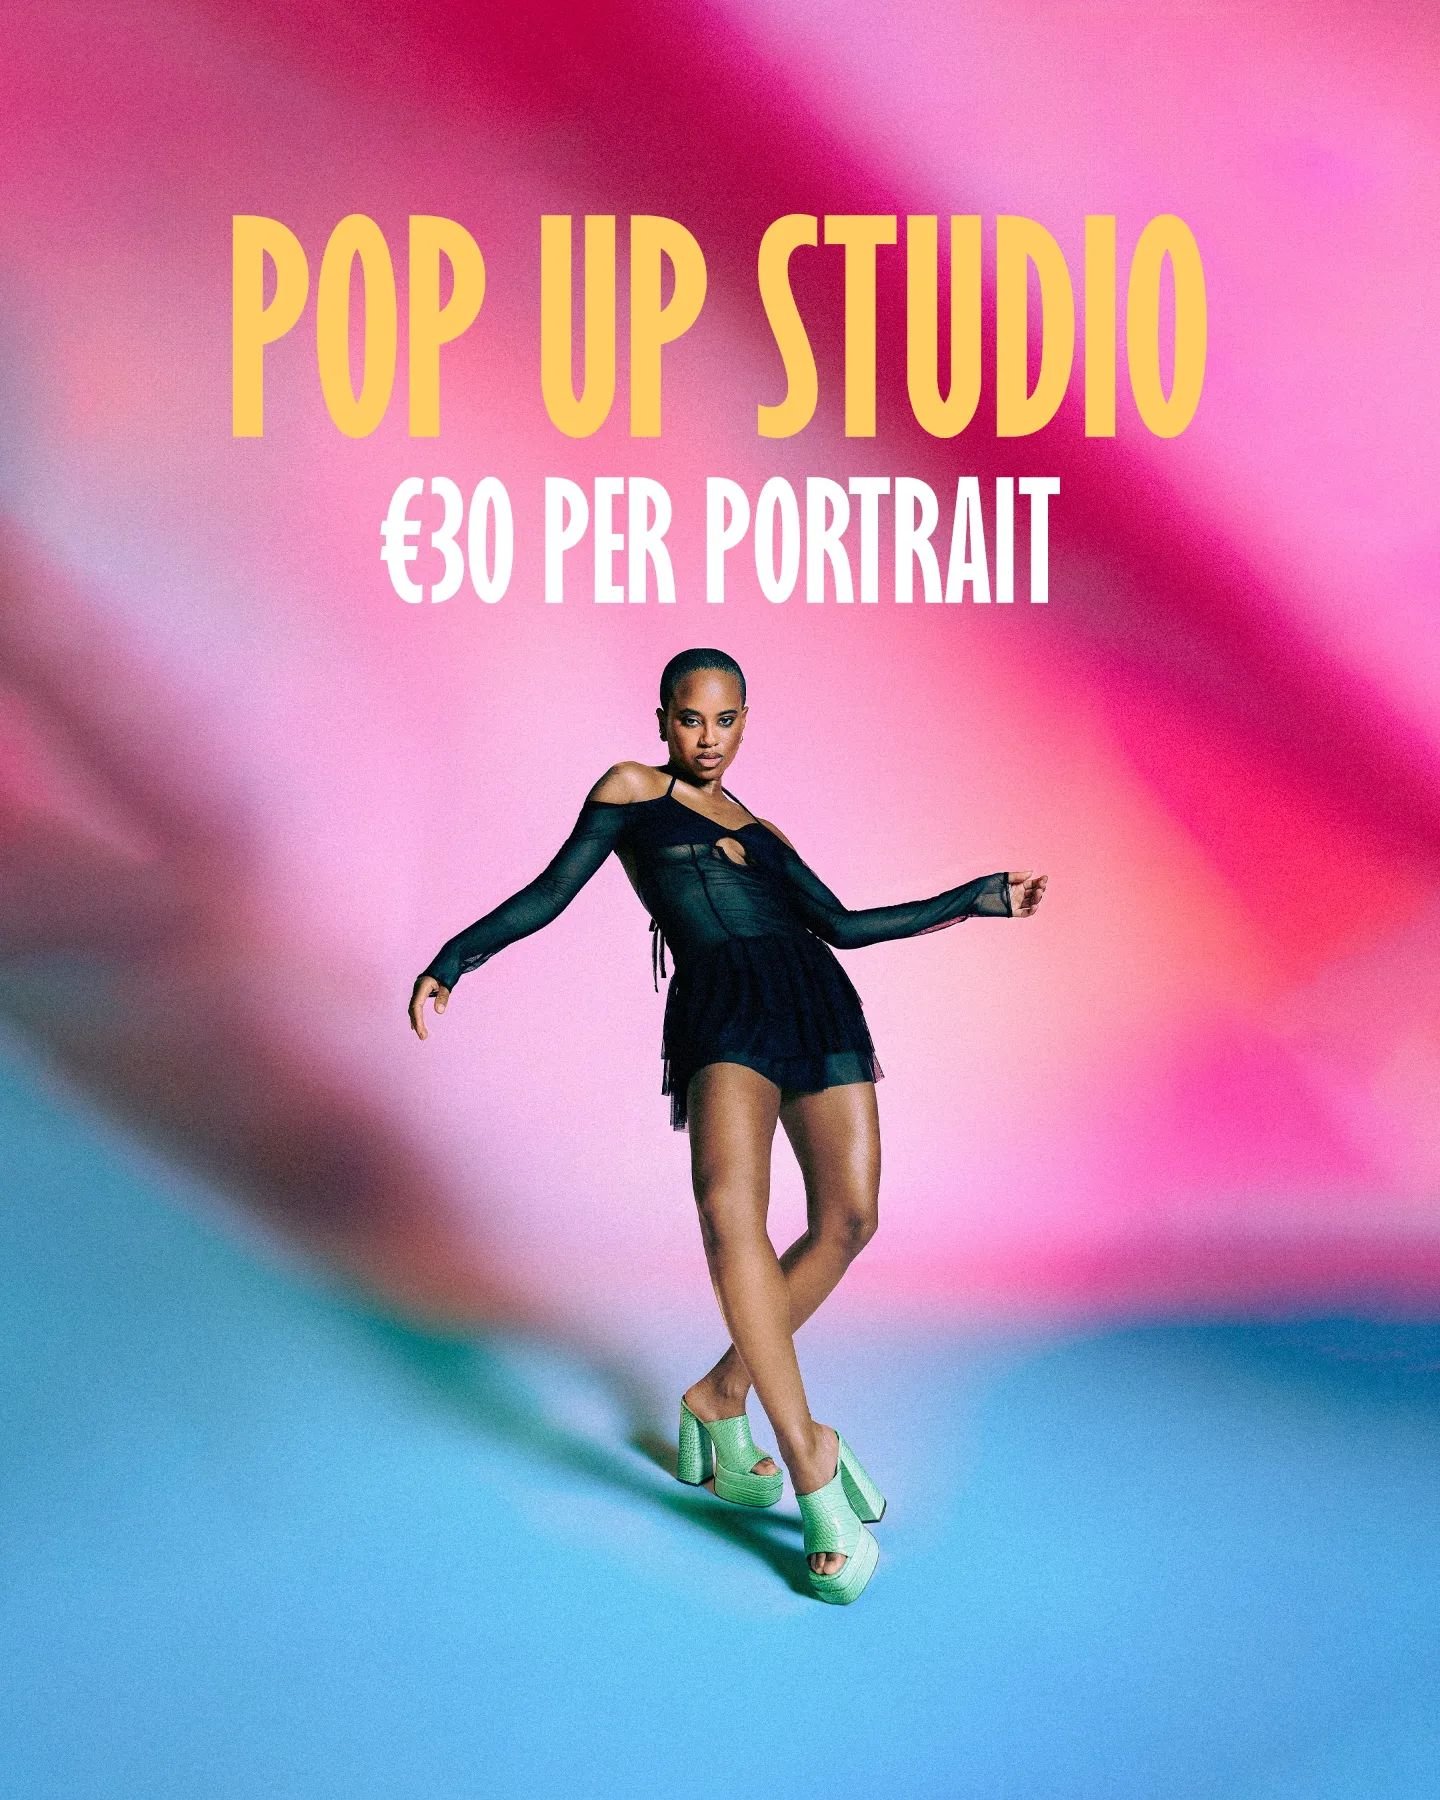 POP UP STUDIO ON SUNDAY THE 25TH OF FEBRUARY ϟ Mixing visions by @jong.volwassen is back! I'm doing a pop up studio, creative portraits for only &euro;30 per portrait, you won't find this deal anywhere else! Need a new profile picture? Sign up for yo